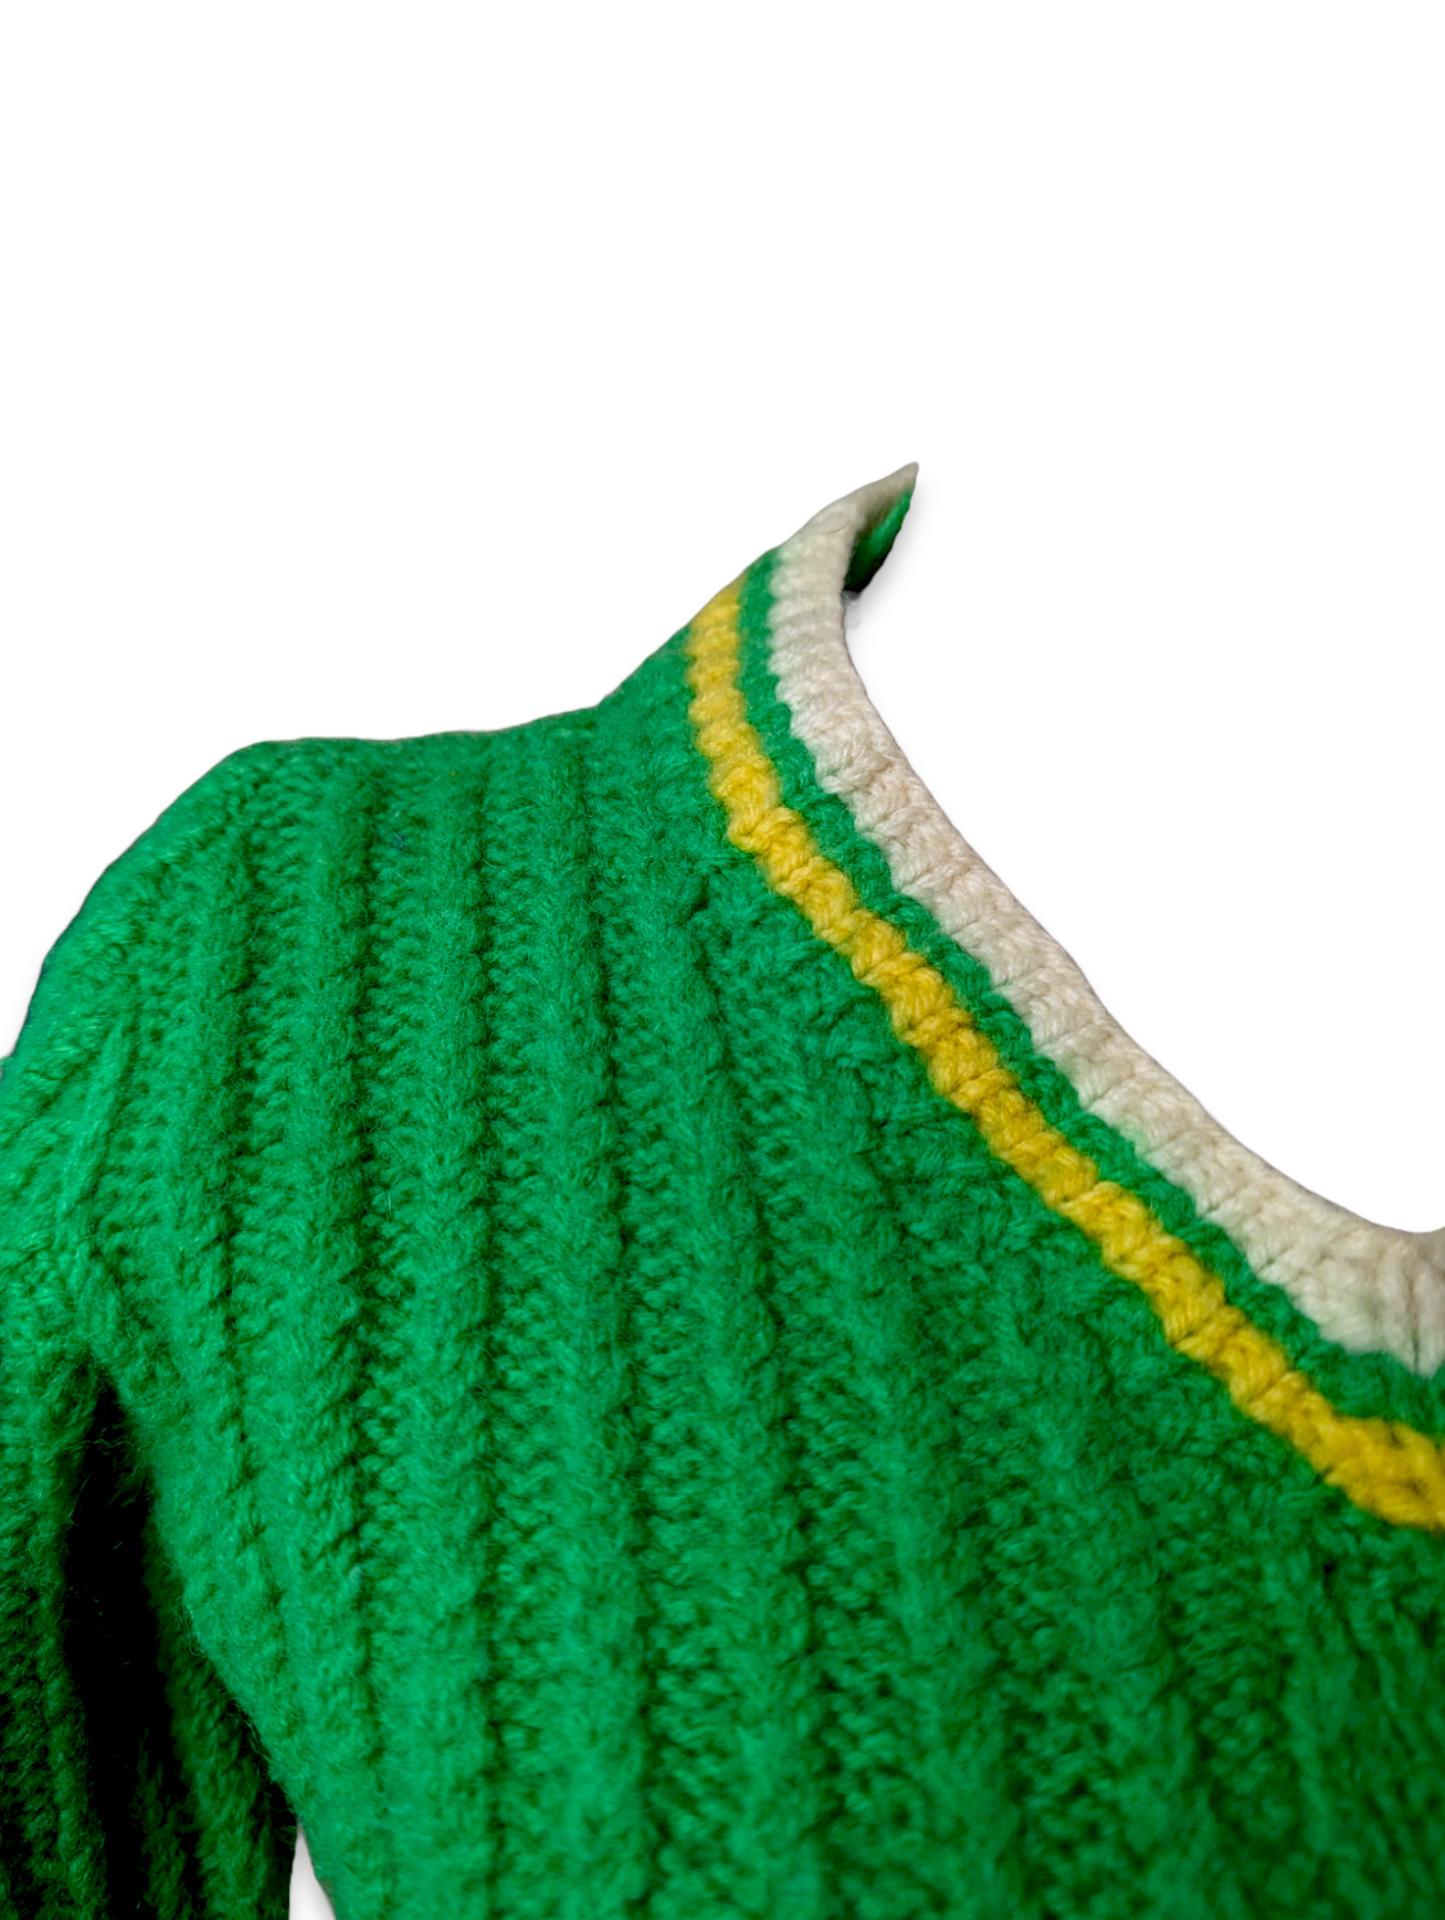 1950s - 1970s Cable Knit Handmade Wool V Neck Sweater in Green, Yellow and Cream